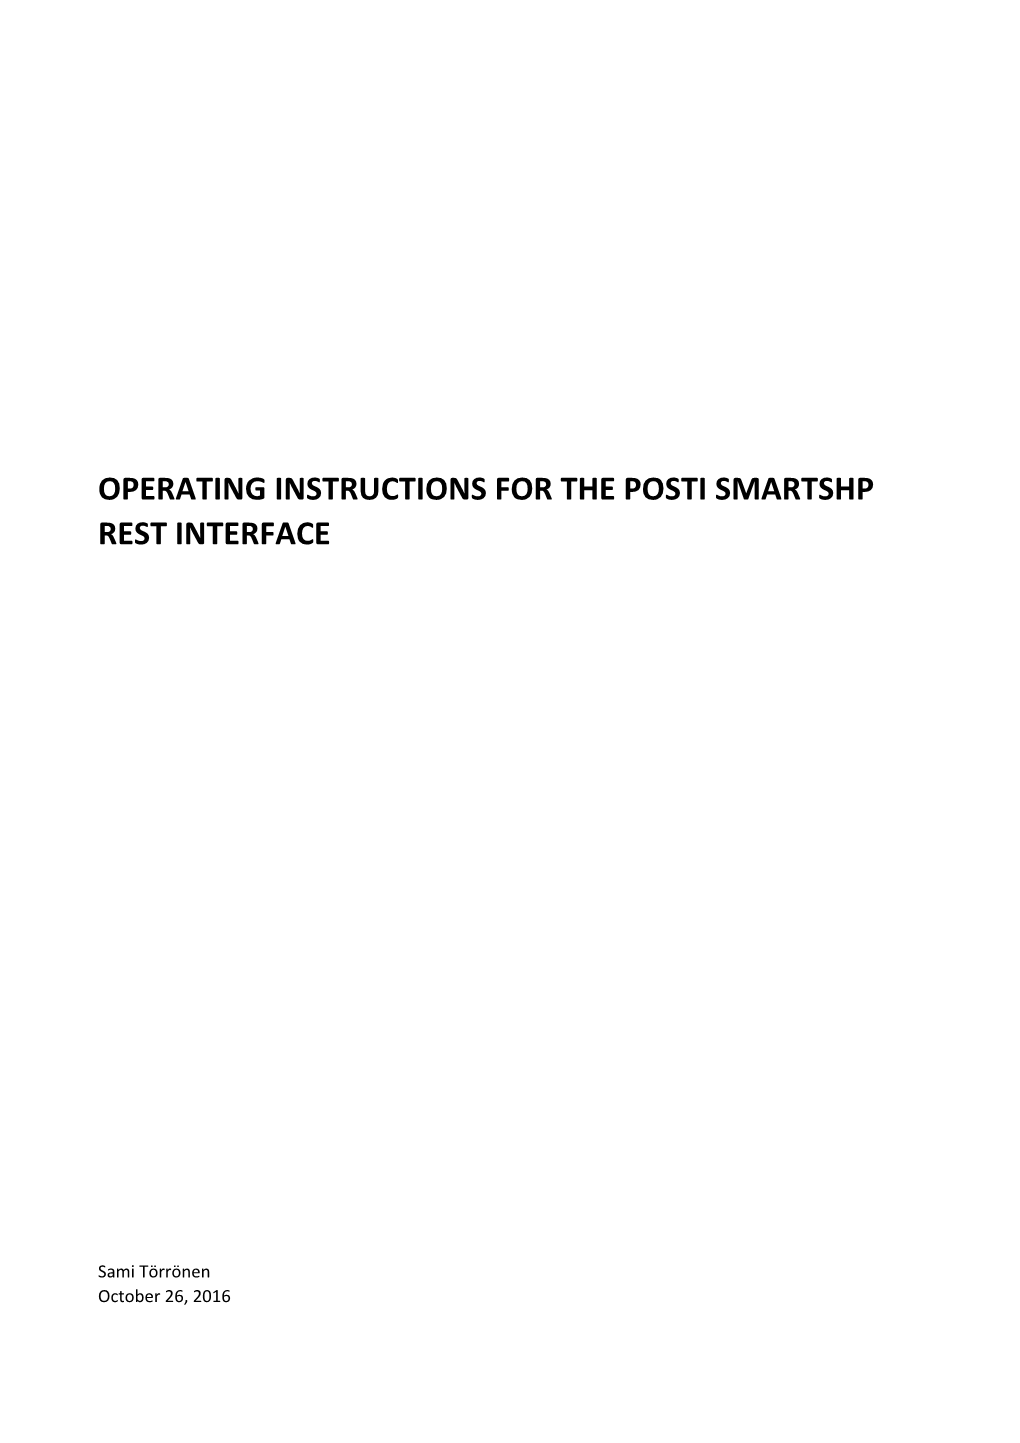 Operating Instructions for the Posti Smartshp Rest Interface